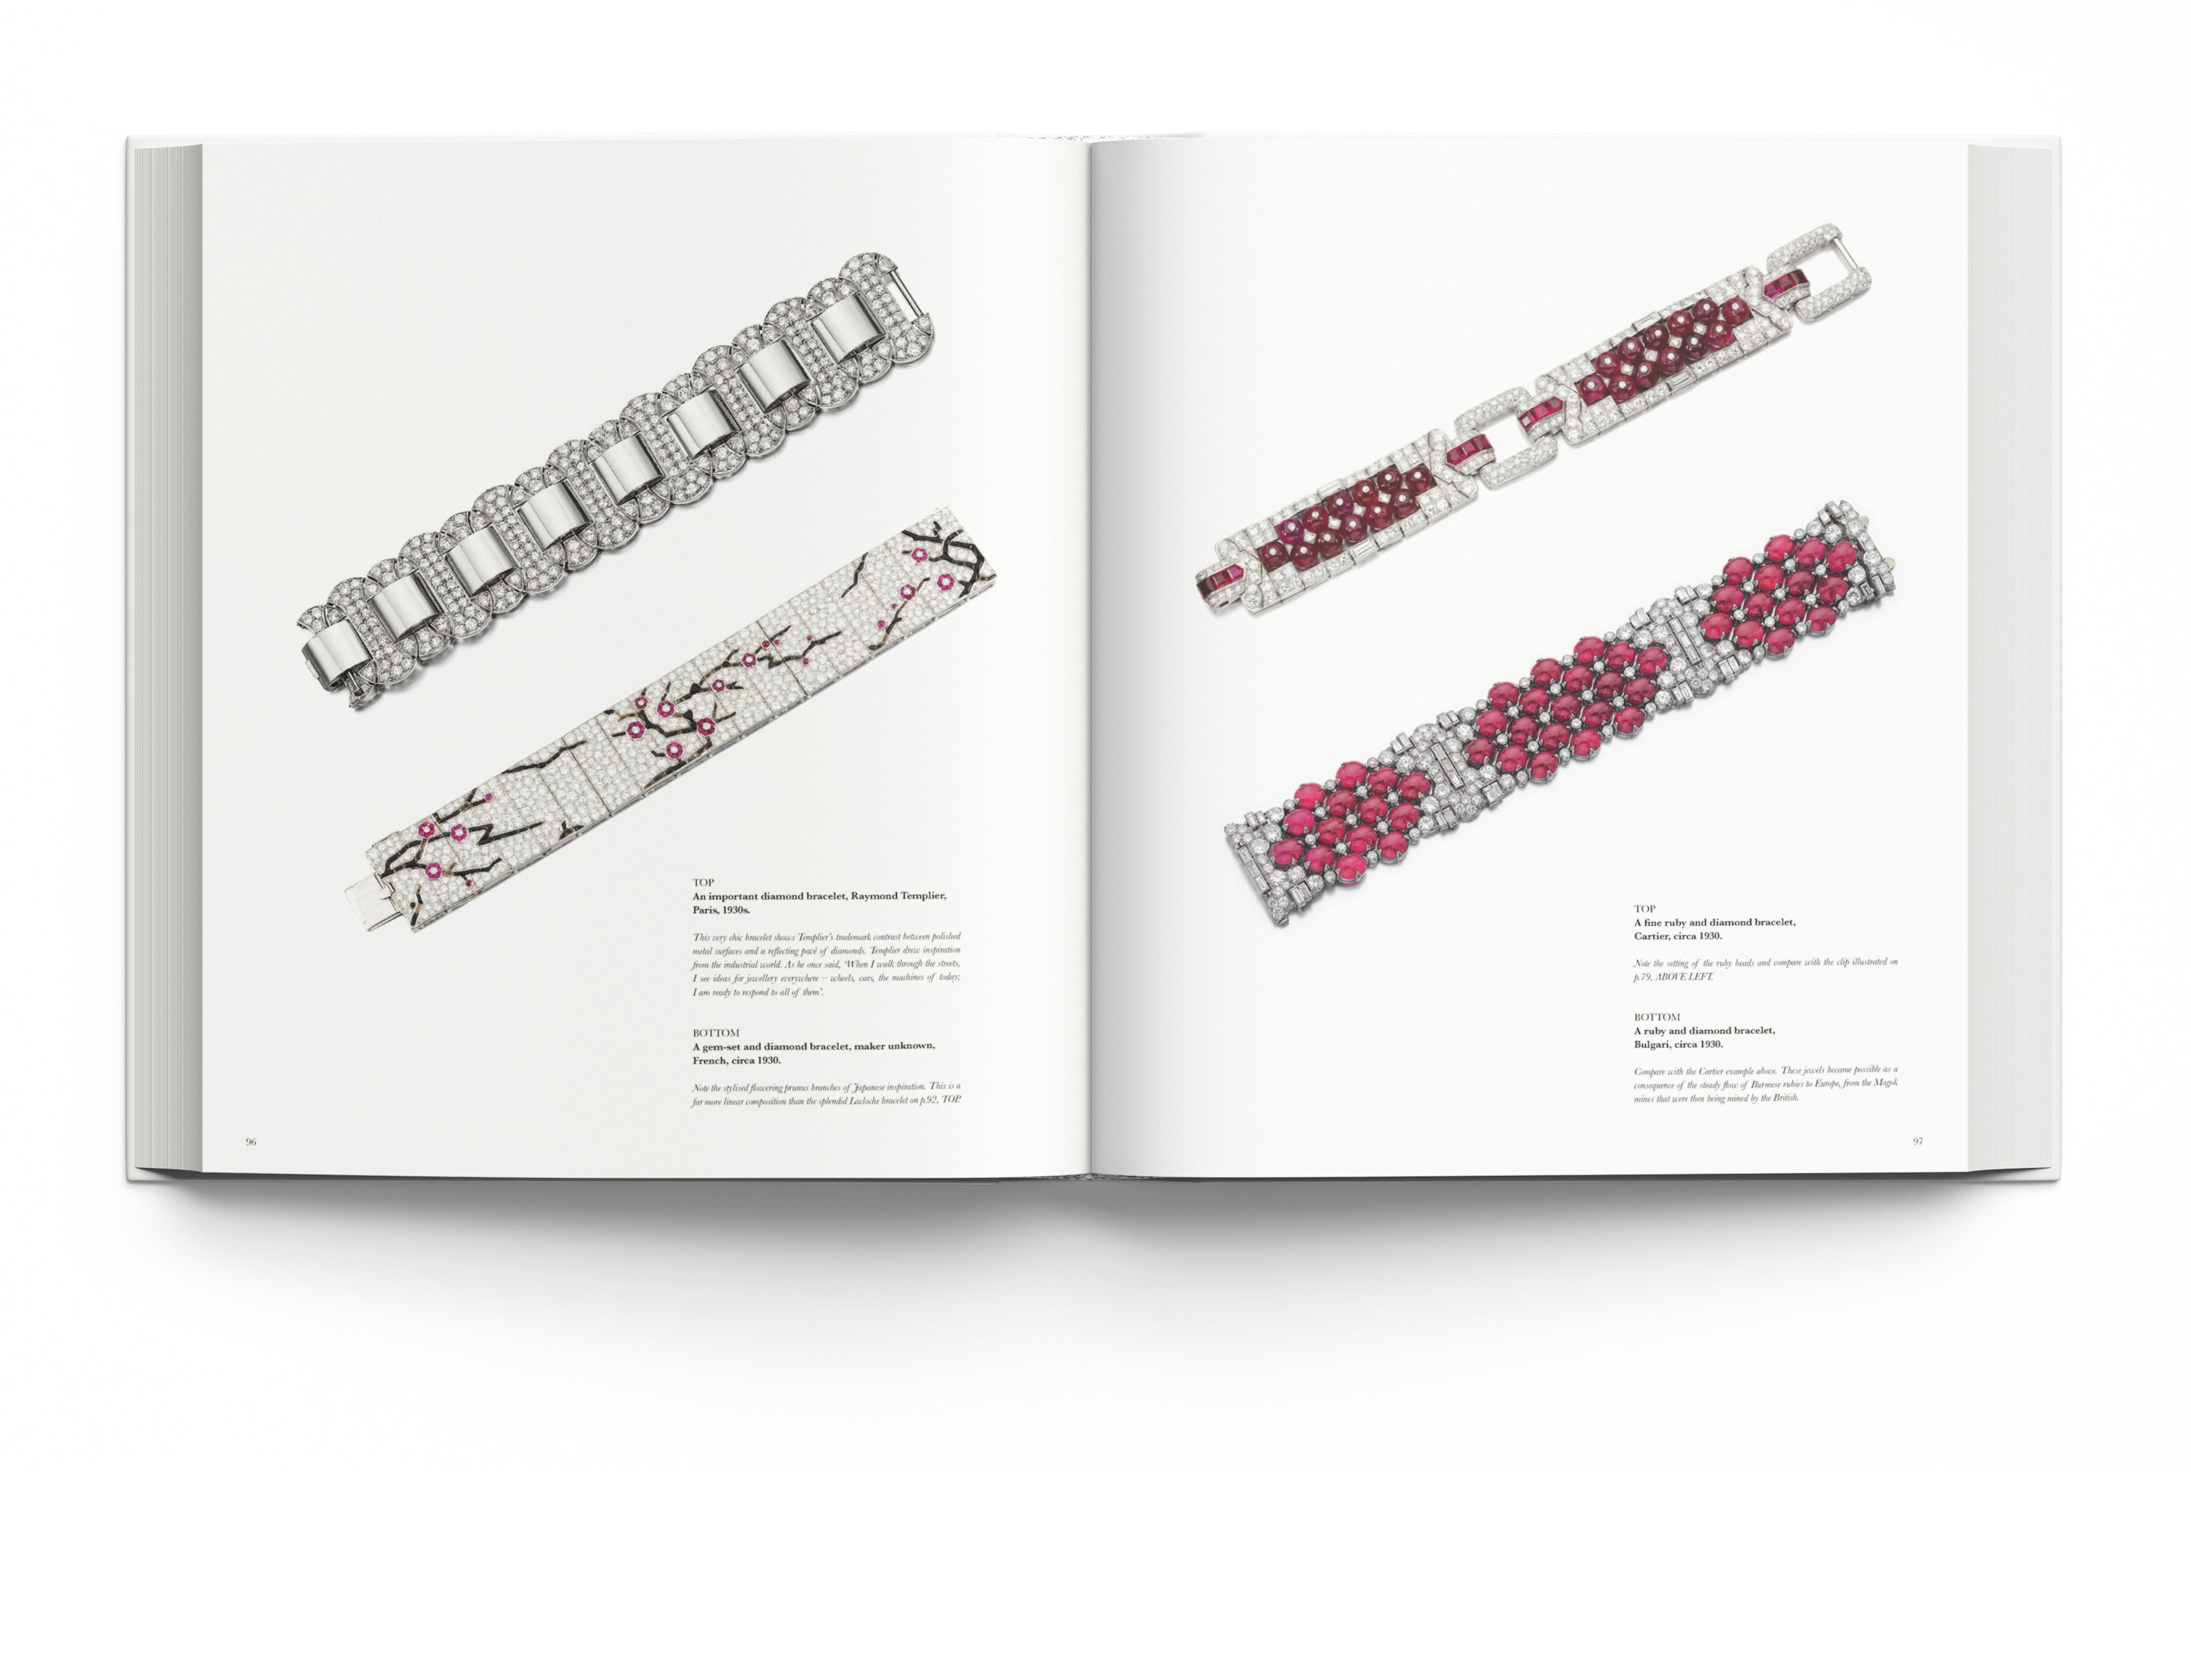 Luxury diamond and ruby jewelled bangles, on white cover, Understanding Jewellery The 20th Century in silver font above.